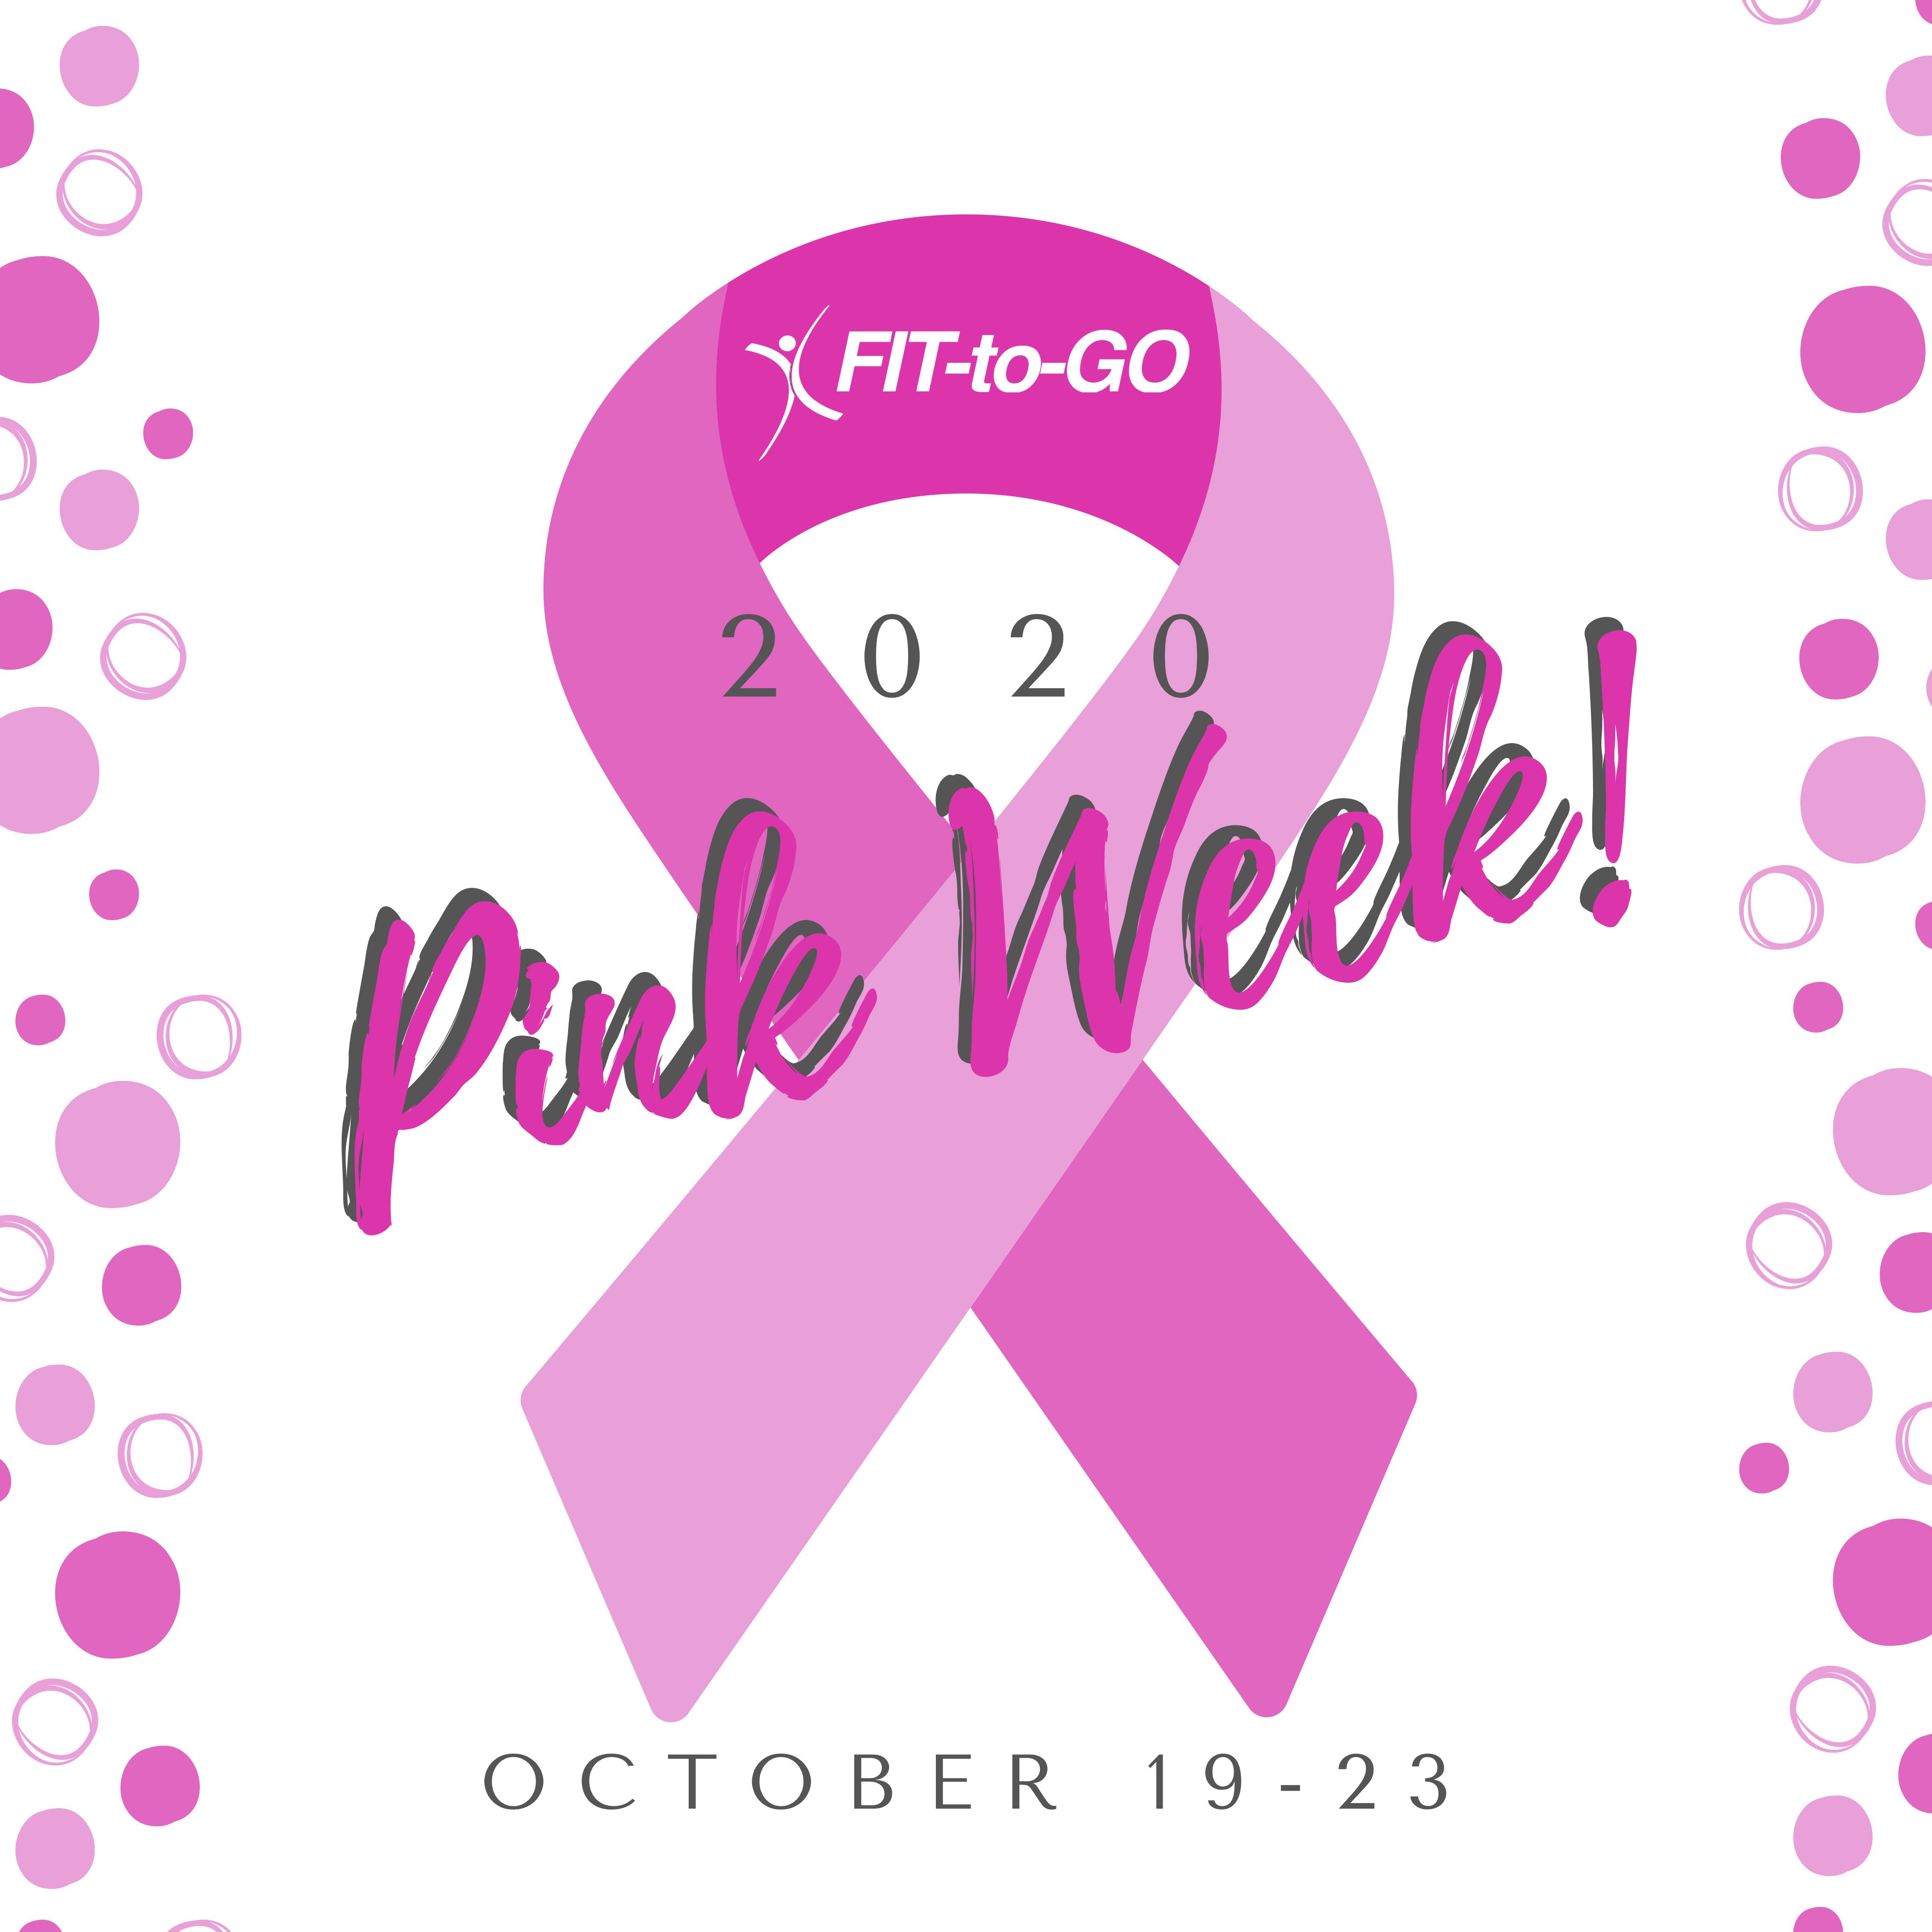 FITtoGO Pink Week! The City of Litchfield